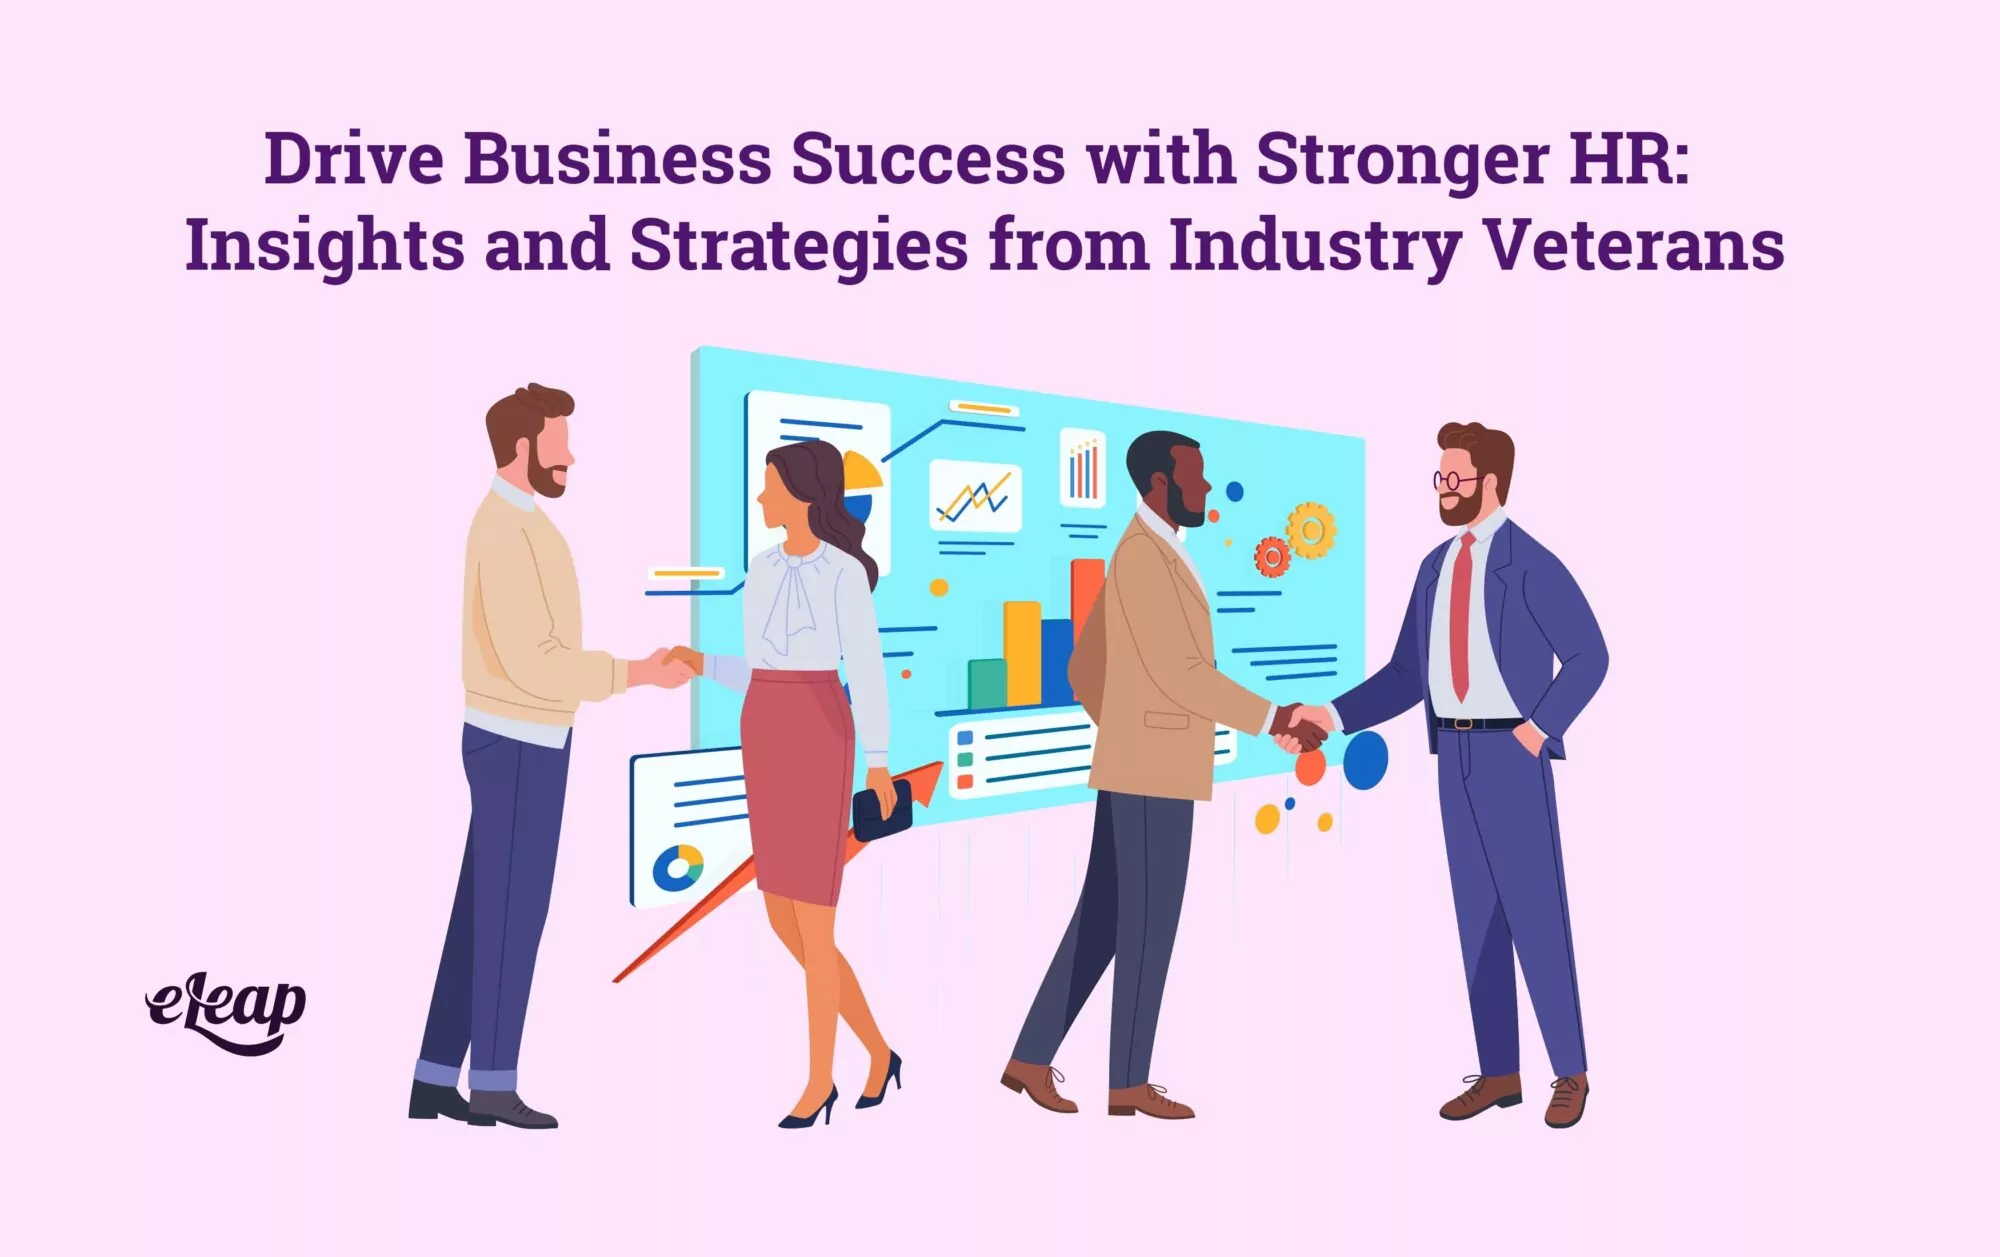 Drive Business Success with Stronger HR: Insights and Strategies from Industry Veterans